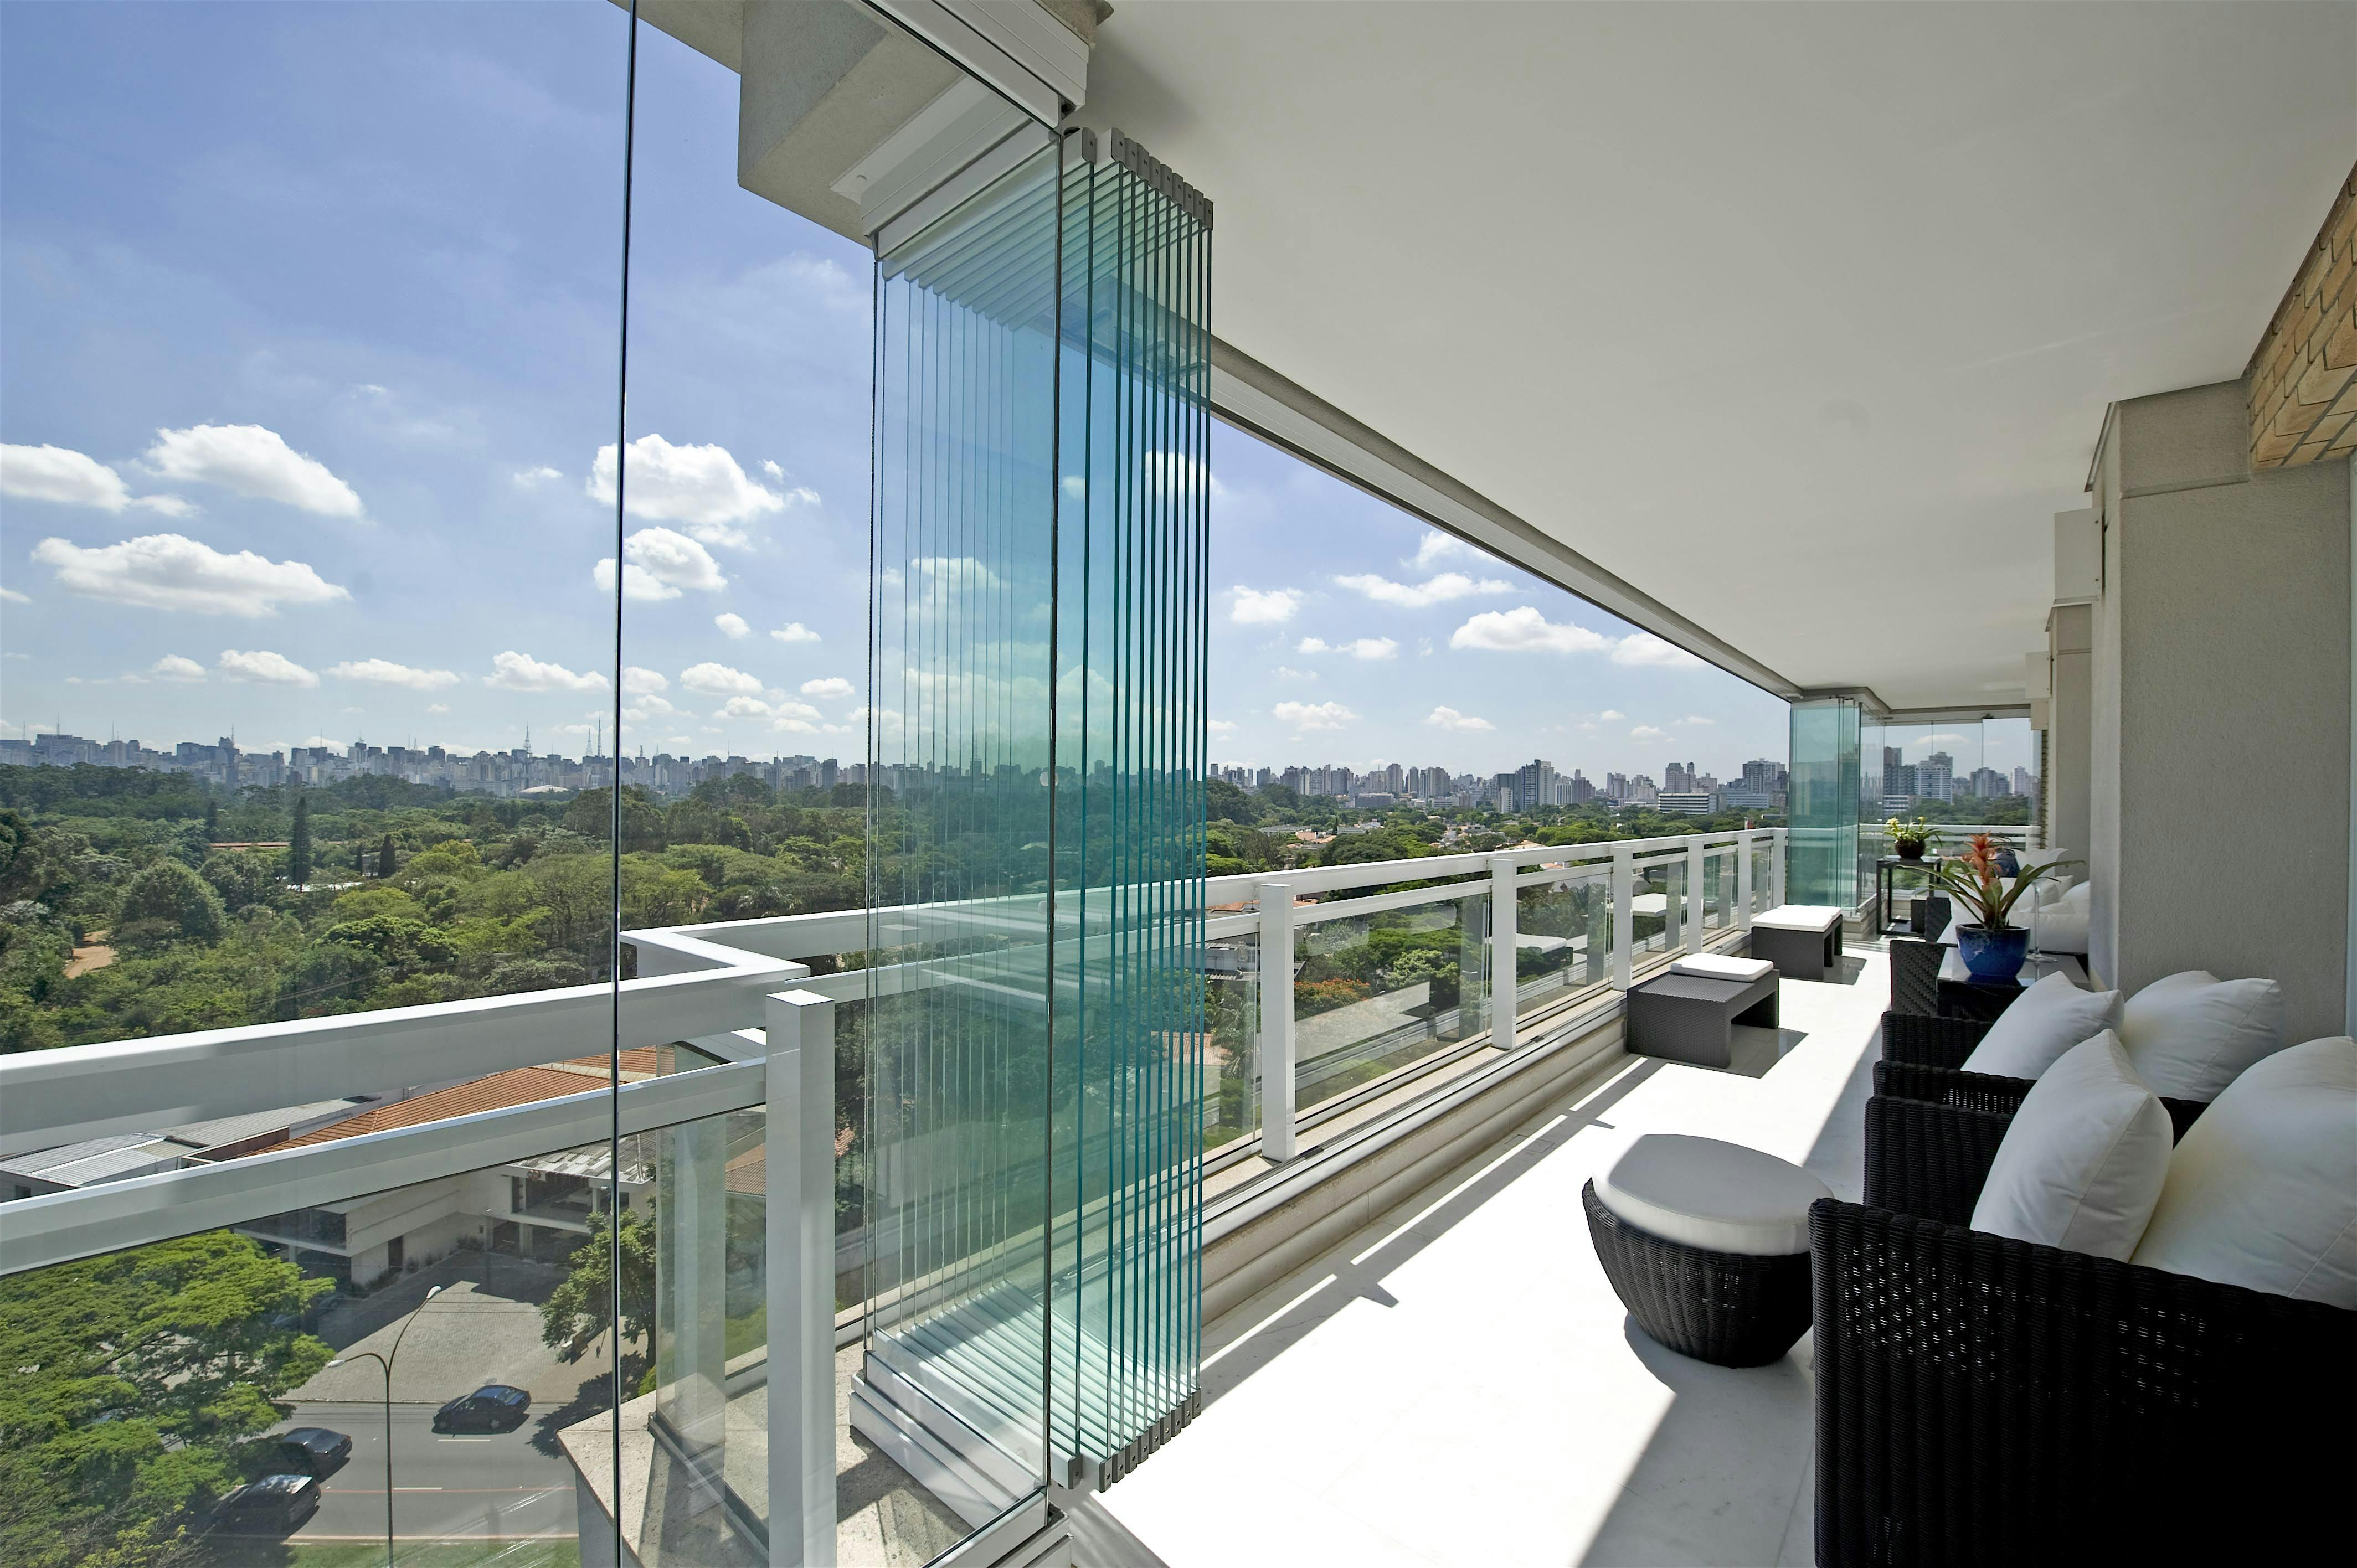 Balcony enclosed with an all glass operable system.